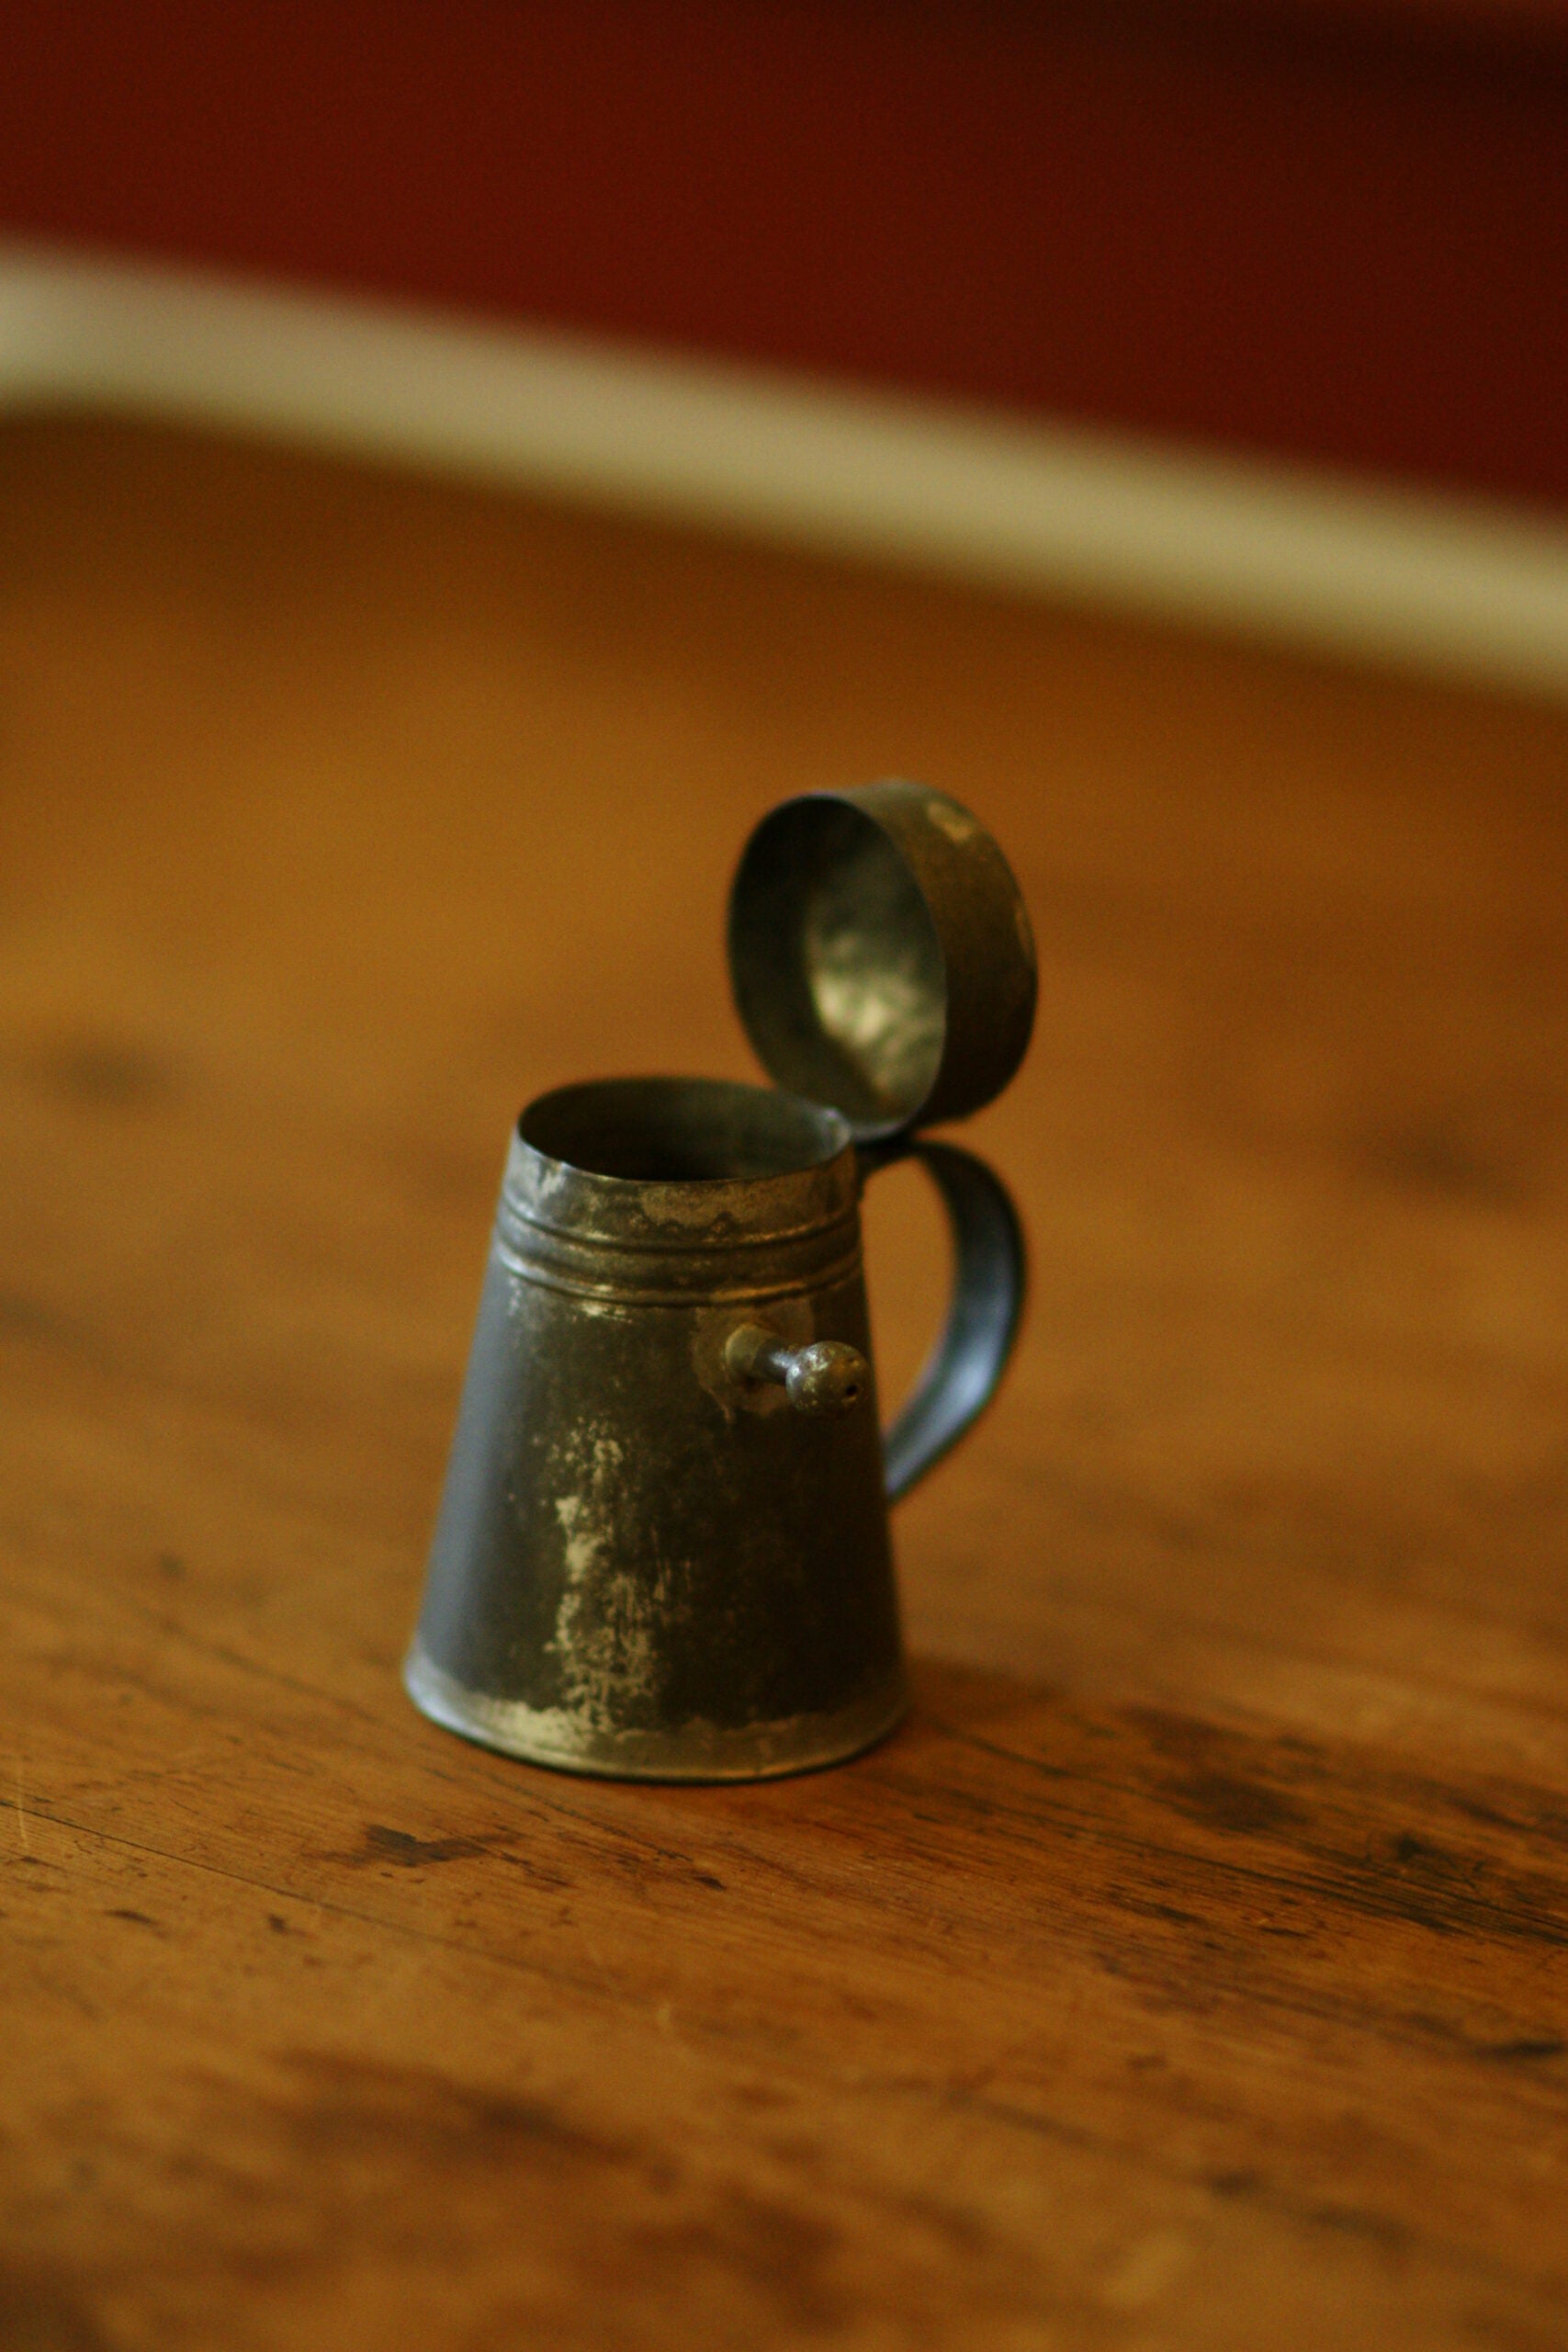 A tiny metal tankard shaped cup, with a lid on a hinge.